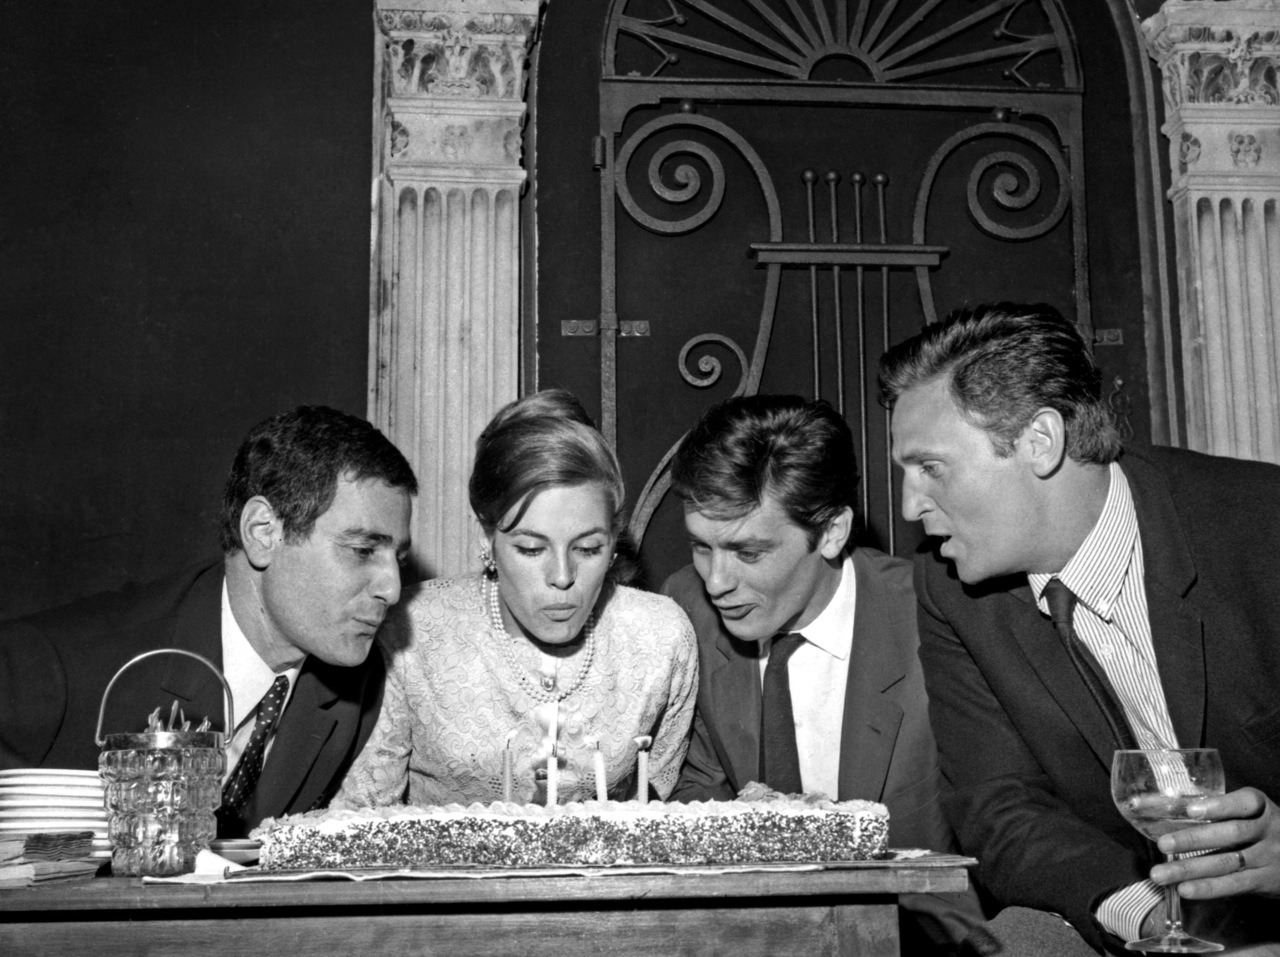 With Jean Delly, Nathalie and Roger Hanin, 1965.